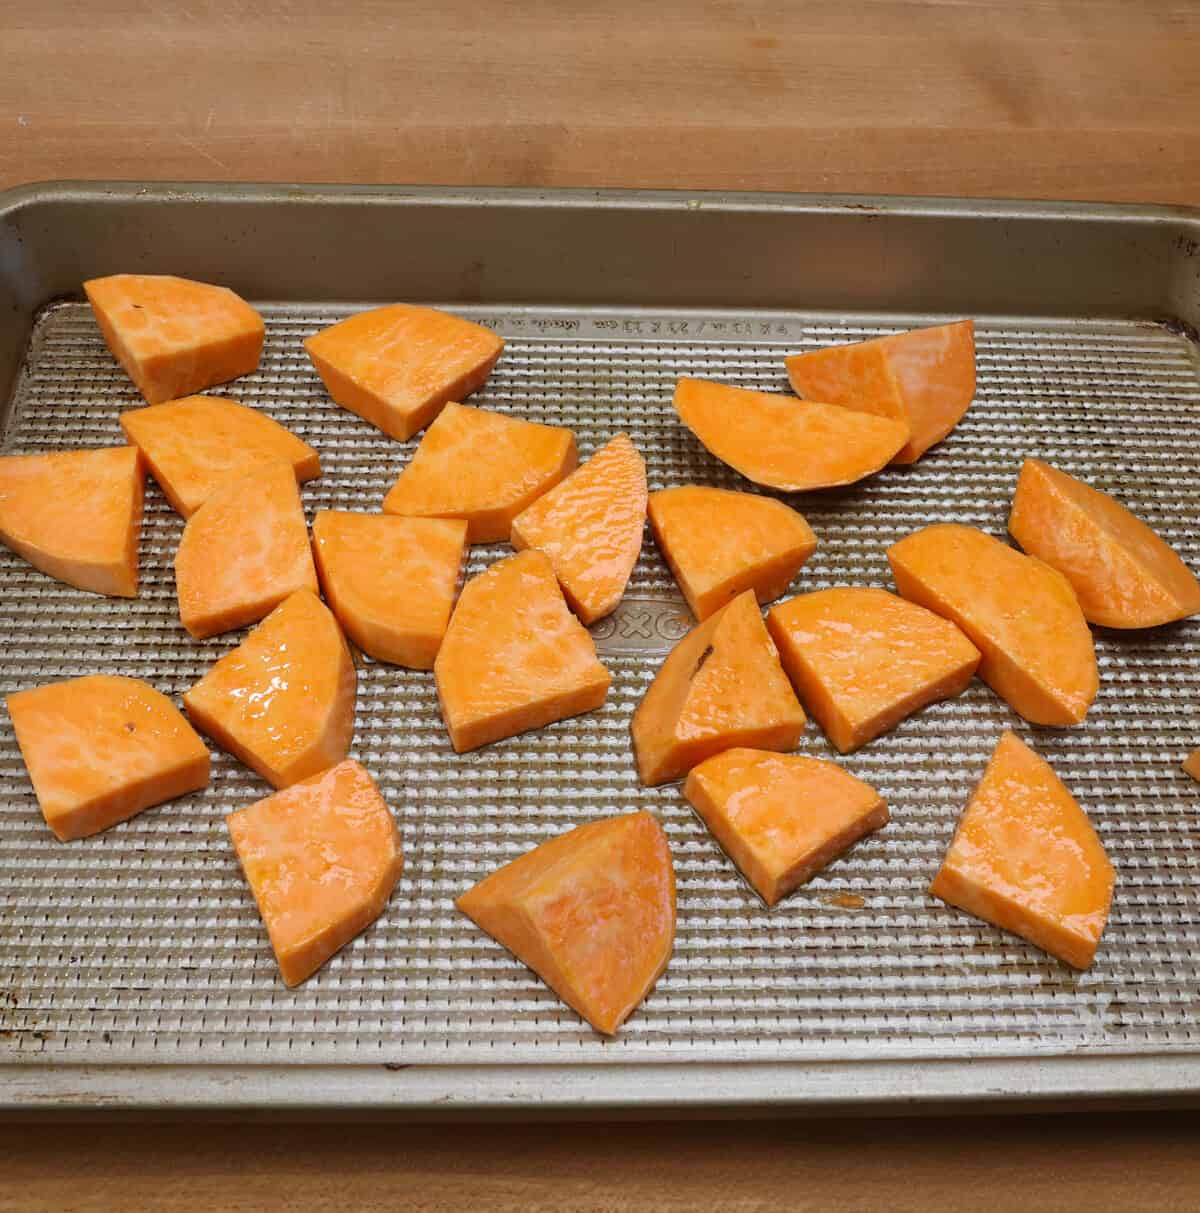 Cubed sweet potatoes tossed with olive oil and seasonings on a rimmed baking sheet.